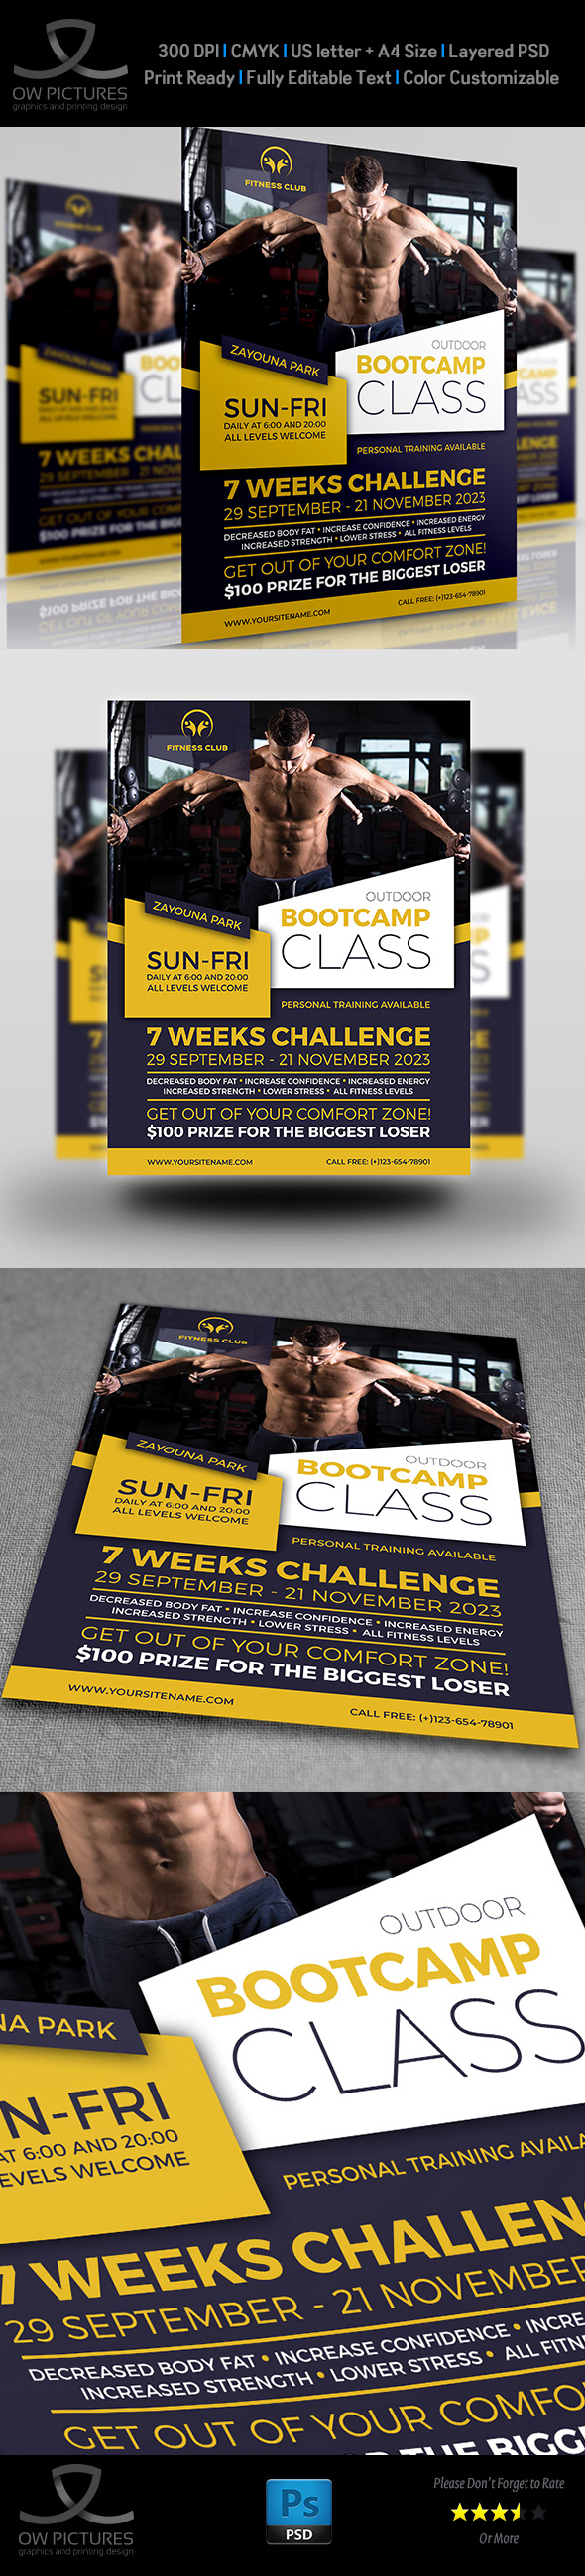 Bootcamp - Fitness Flyer Template on Behance Throughout Fitness Boot Camp Flyer Template